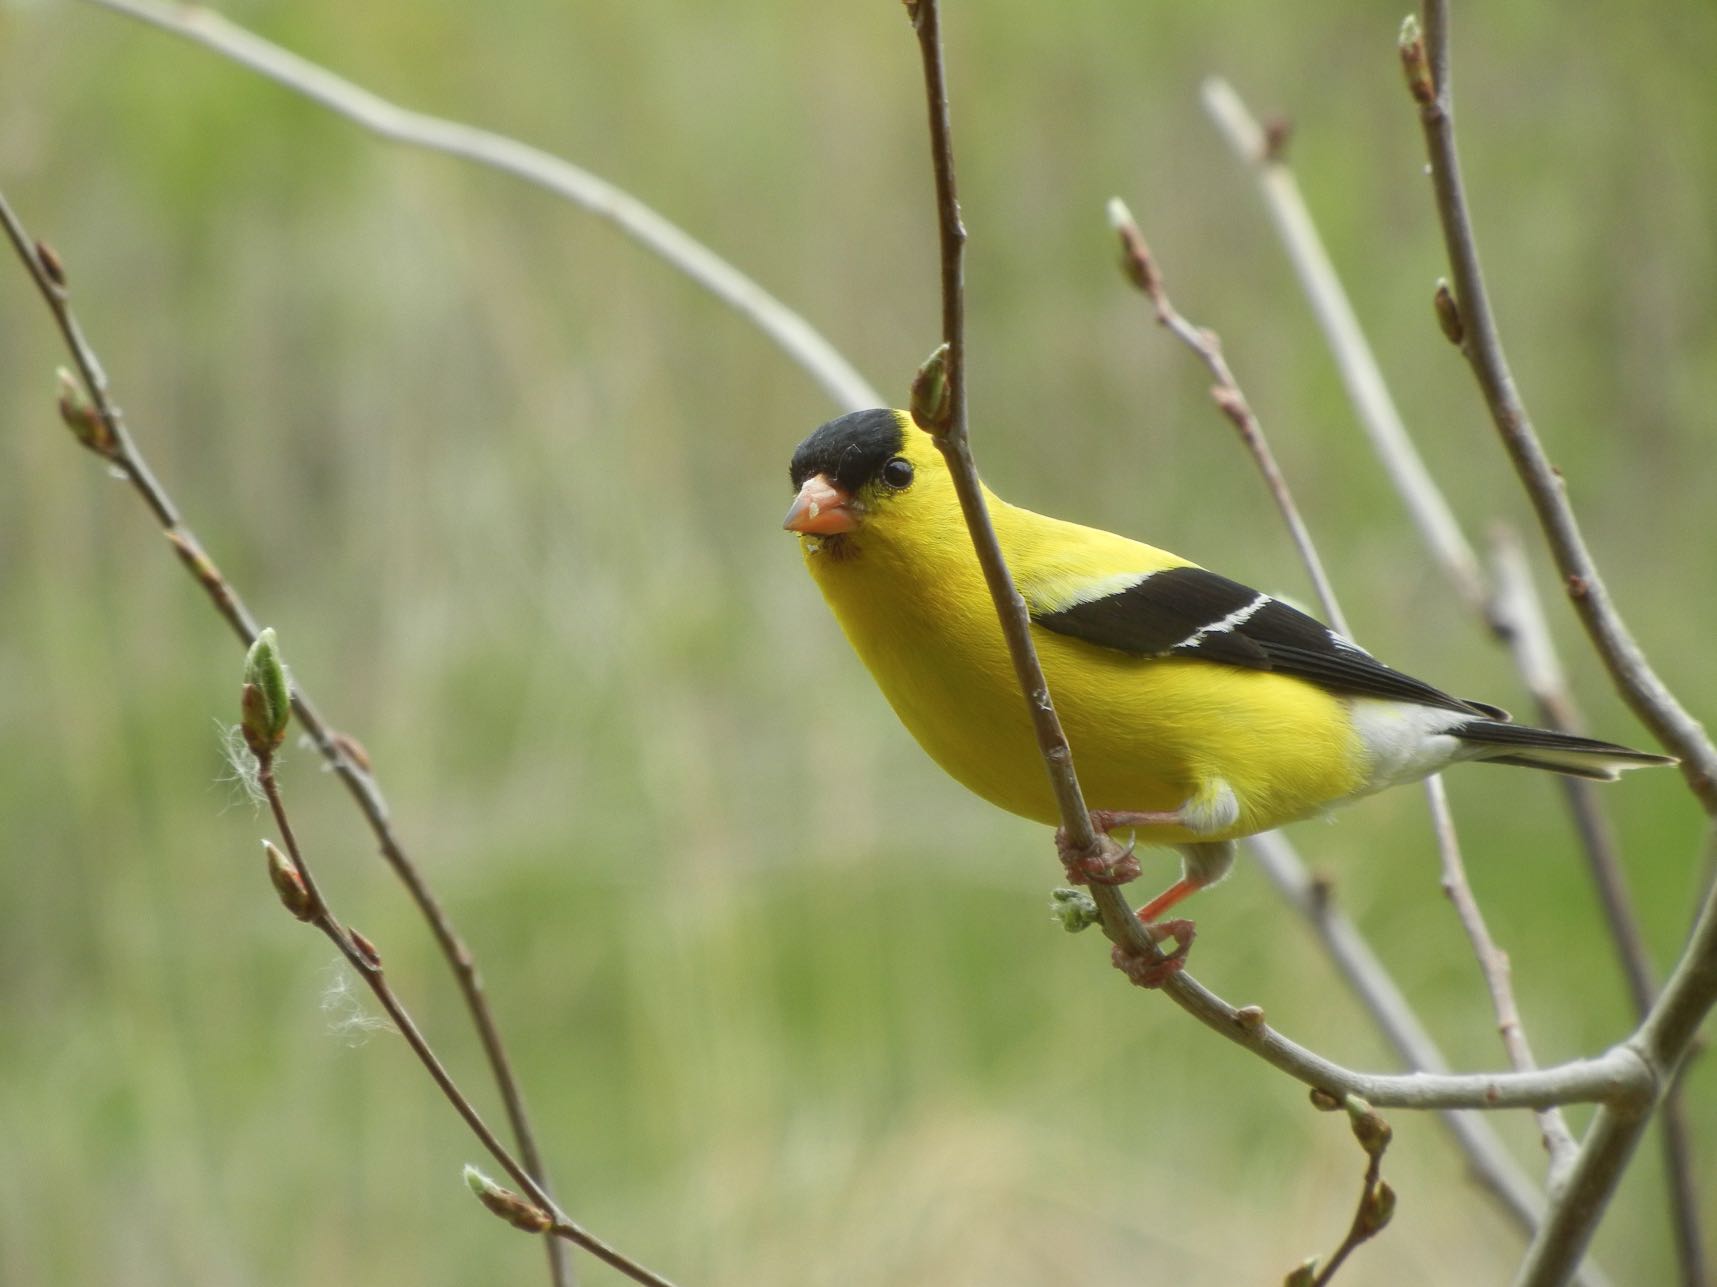 Yellow goldfinch perched on a branch